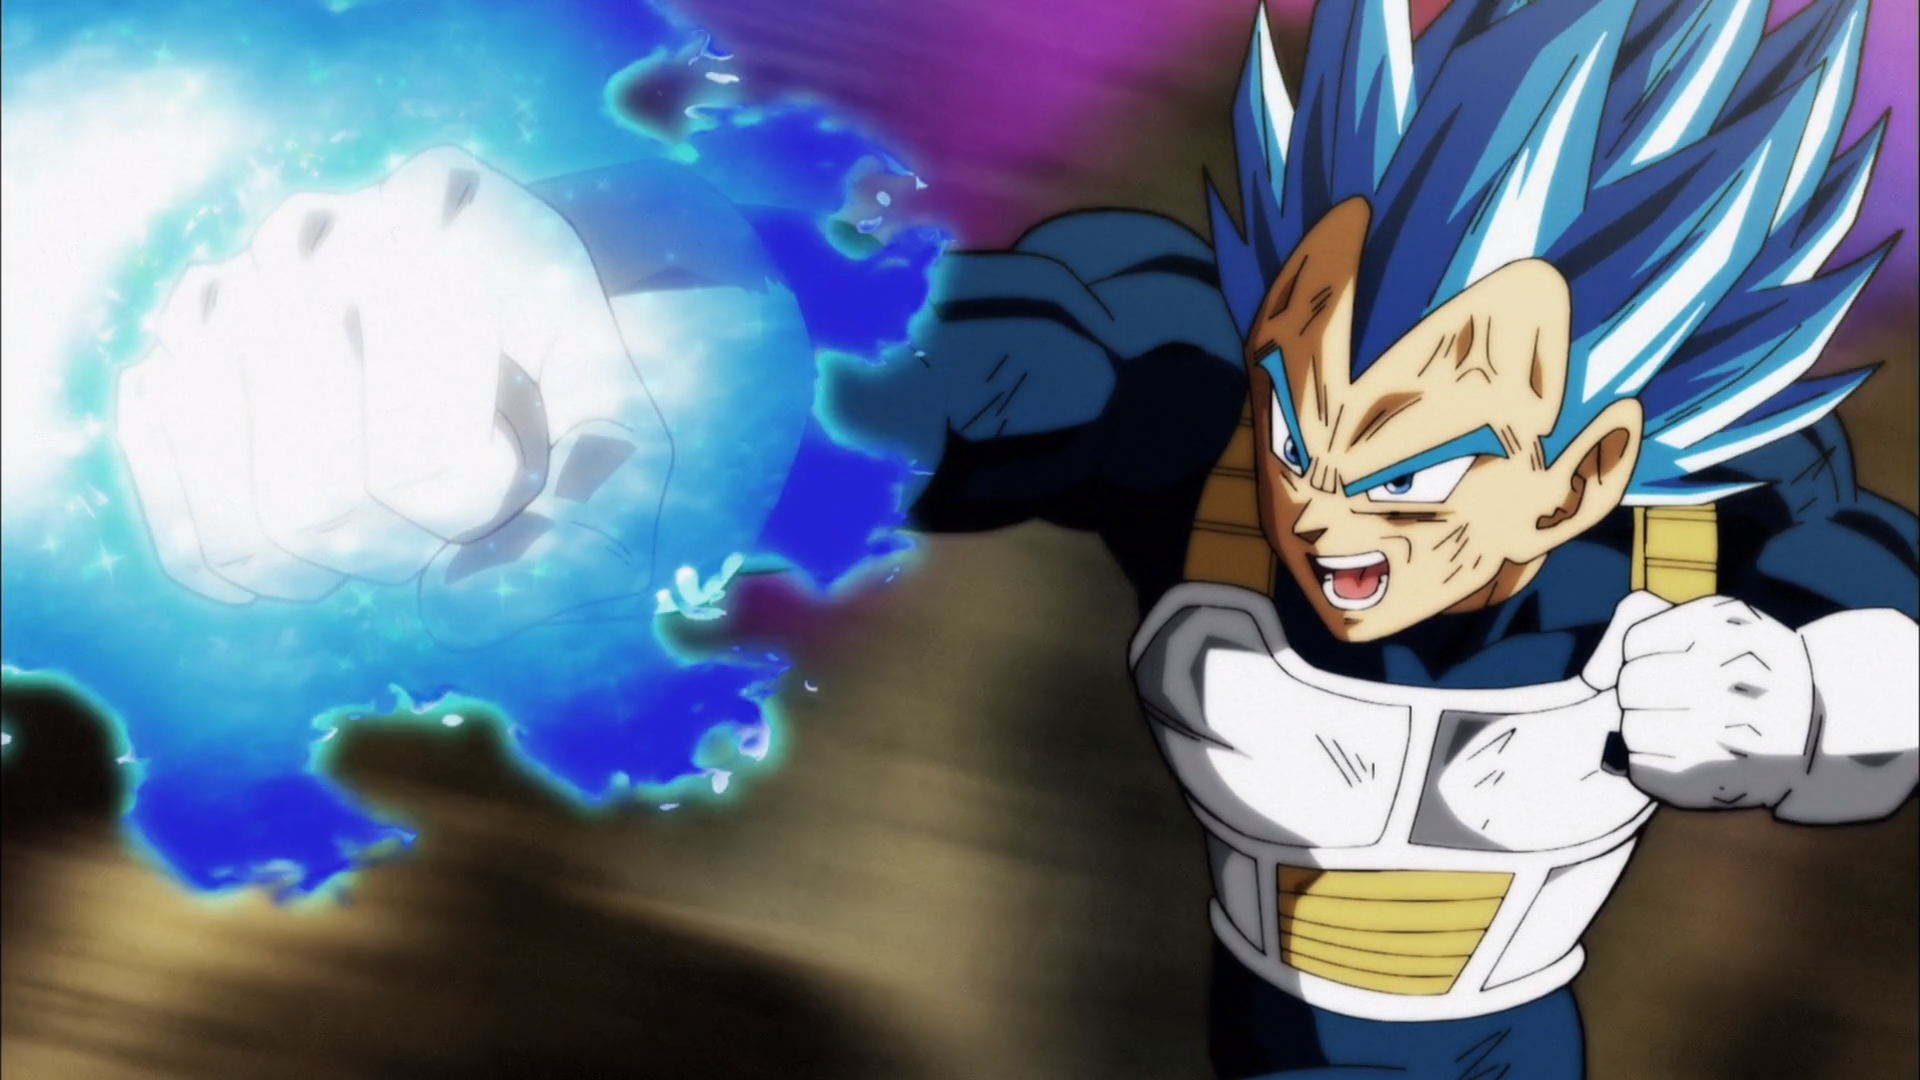 In your opinion, the Super Saiyan Blue Evolution is the official